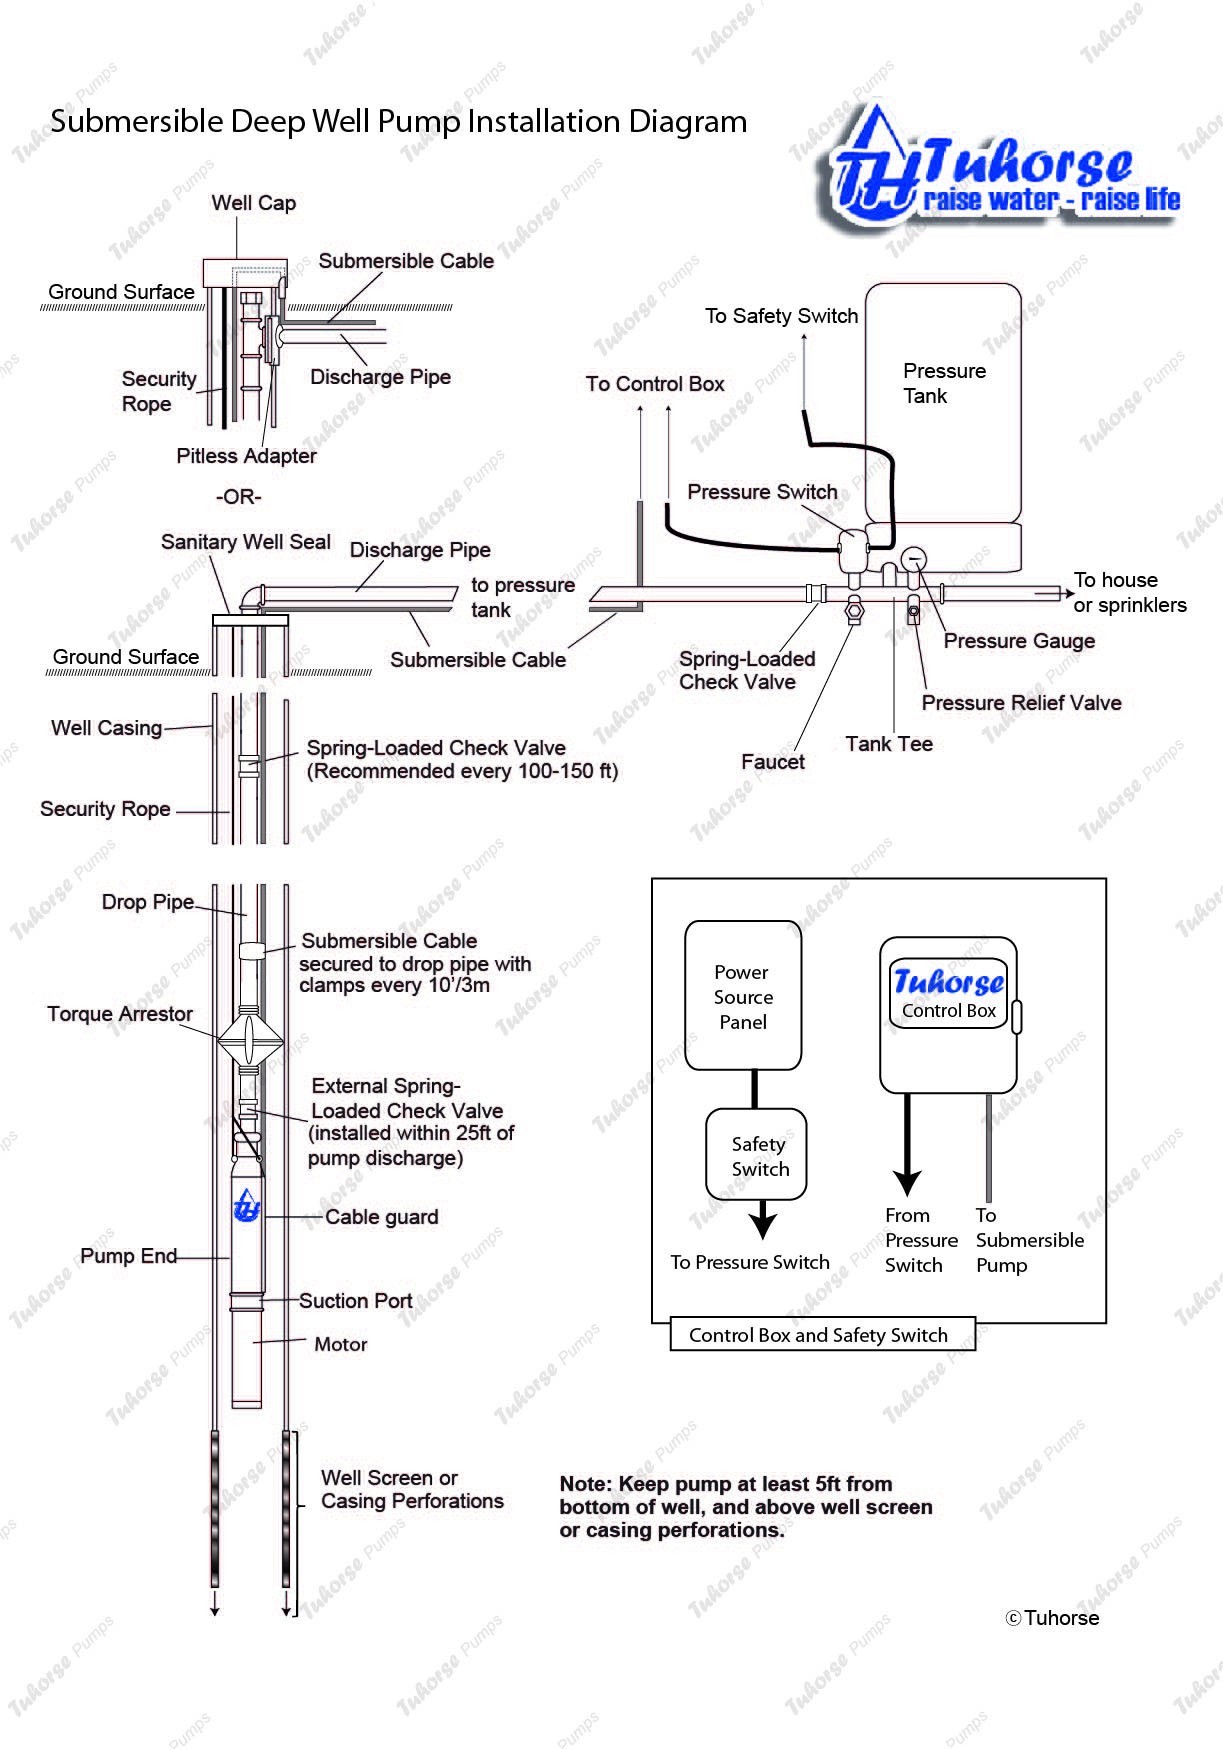 Wiring Diagram for Well Pump Pressure Switch New Enchanting Well Wiring Diagram Sketch Electrical Circuit Diagram